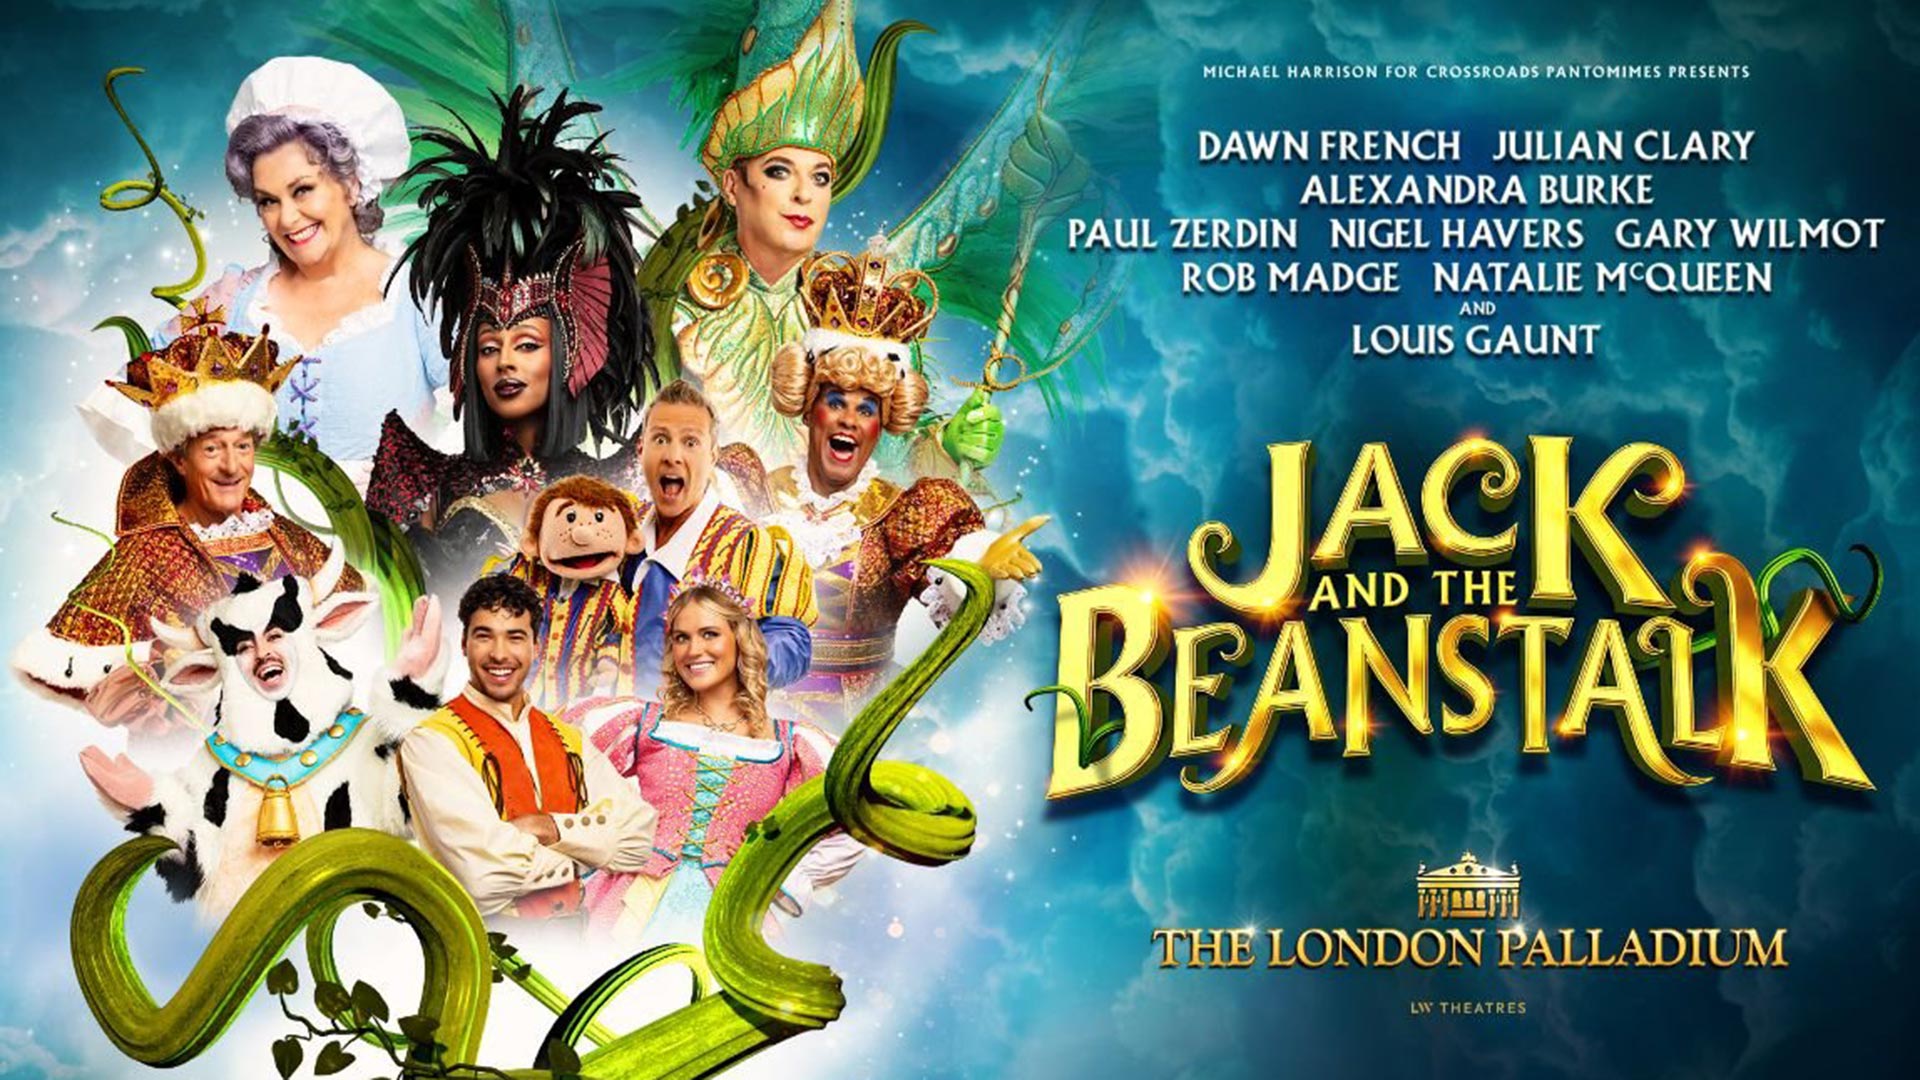 Micheal Harrison for Crossroads Pantomimes Presents DAWN FRENCH, JULIAN CLARY, ALEXANDRA BURKE, PAUL ZERDIN, NIGEL HAVERS, GARY WILMOT, ROB MADGE, NATALIE McQUEEN and LOUIS GAUNT JACK AND THE BEANSTALK The London Palladium LW Theatres